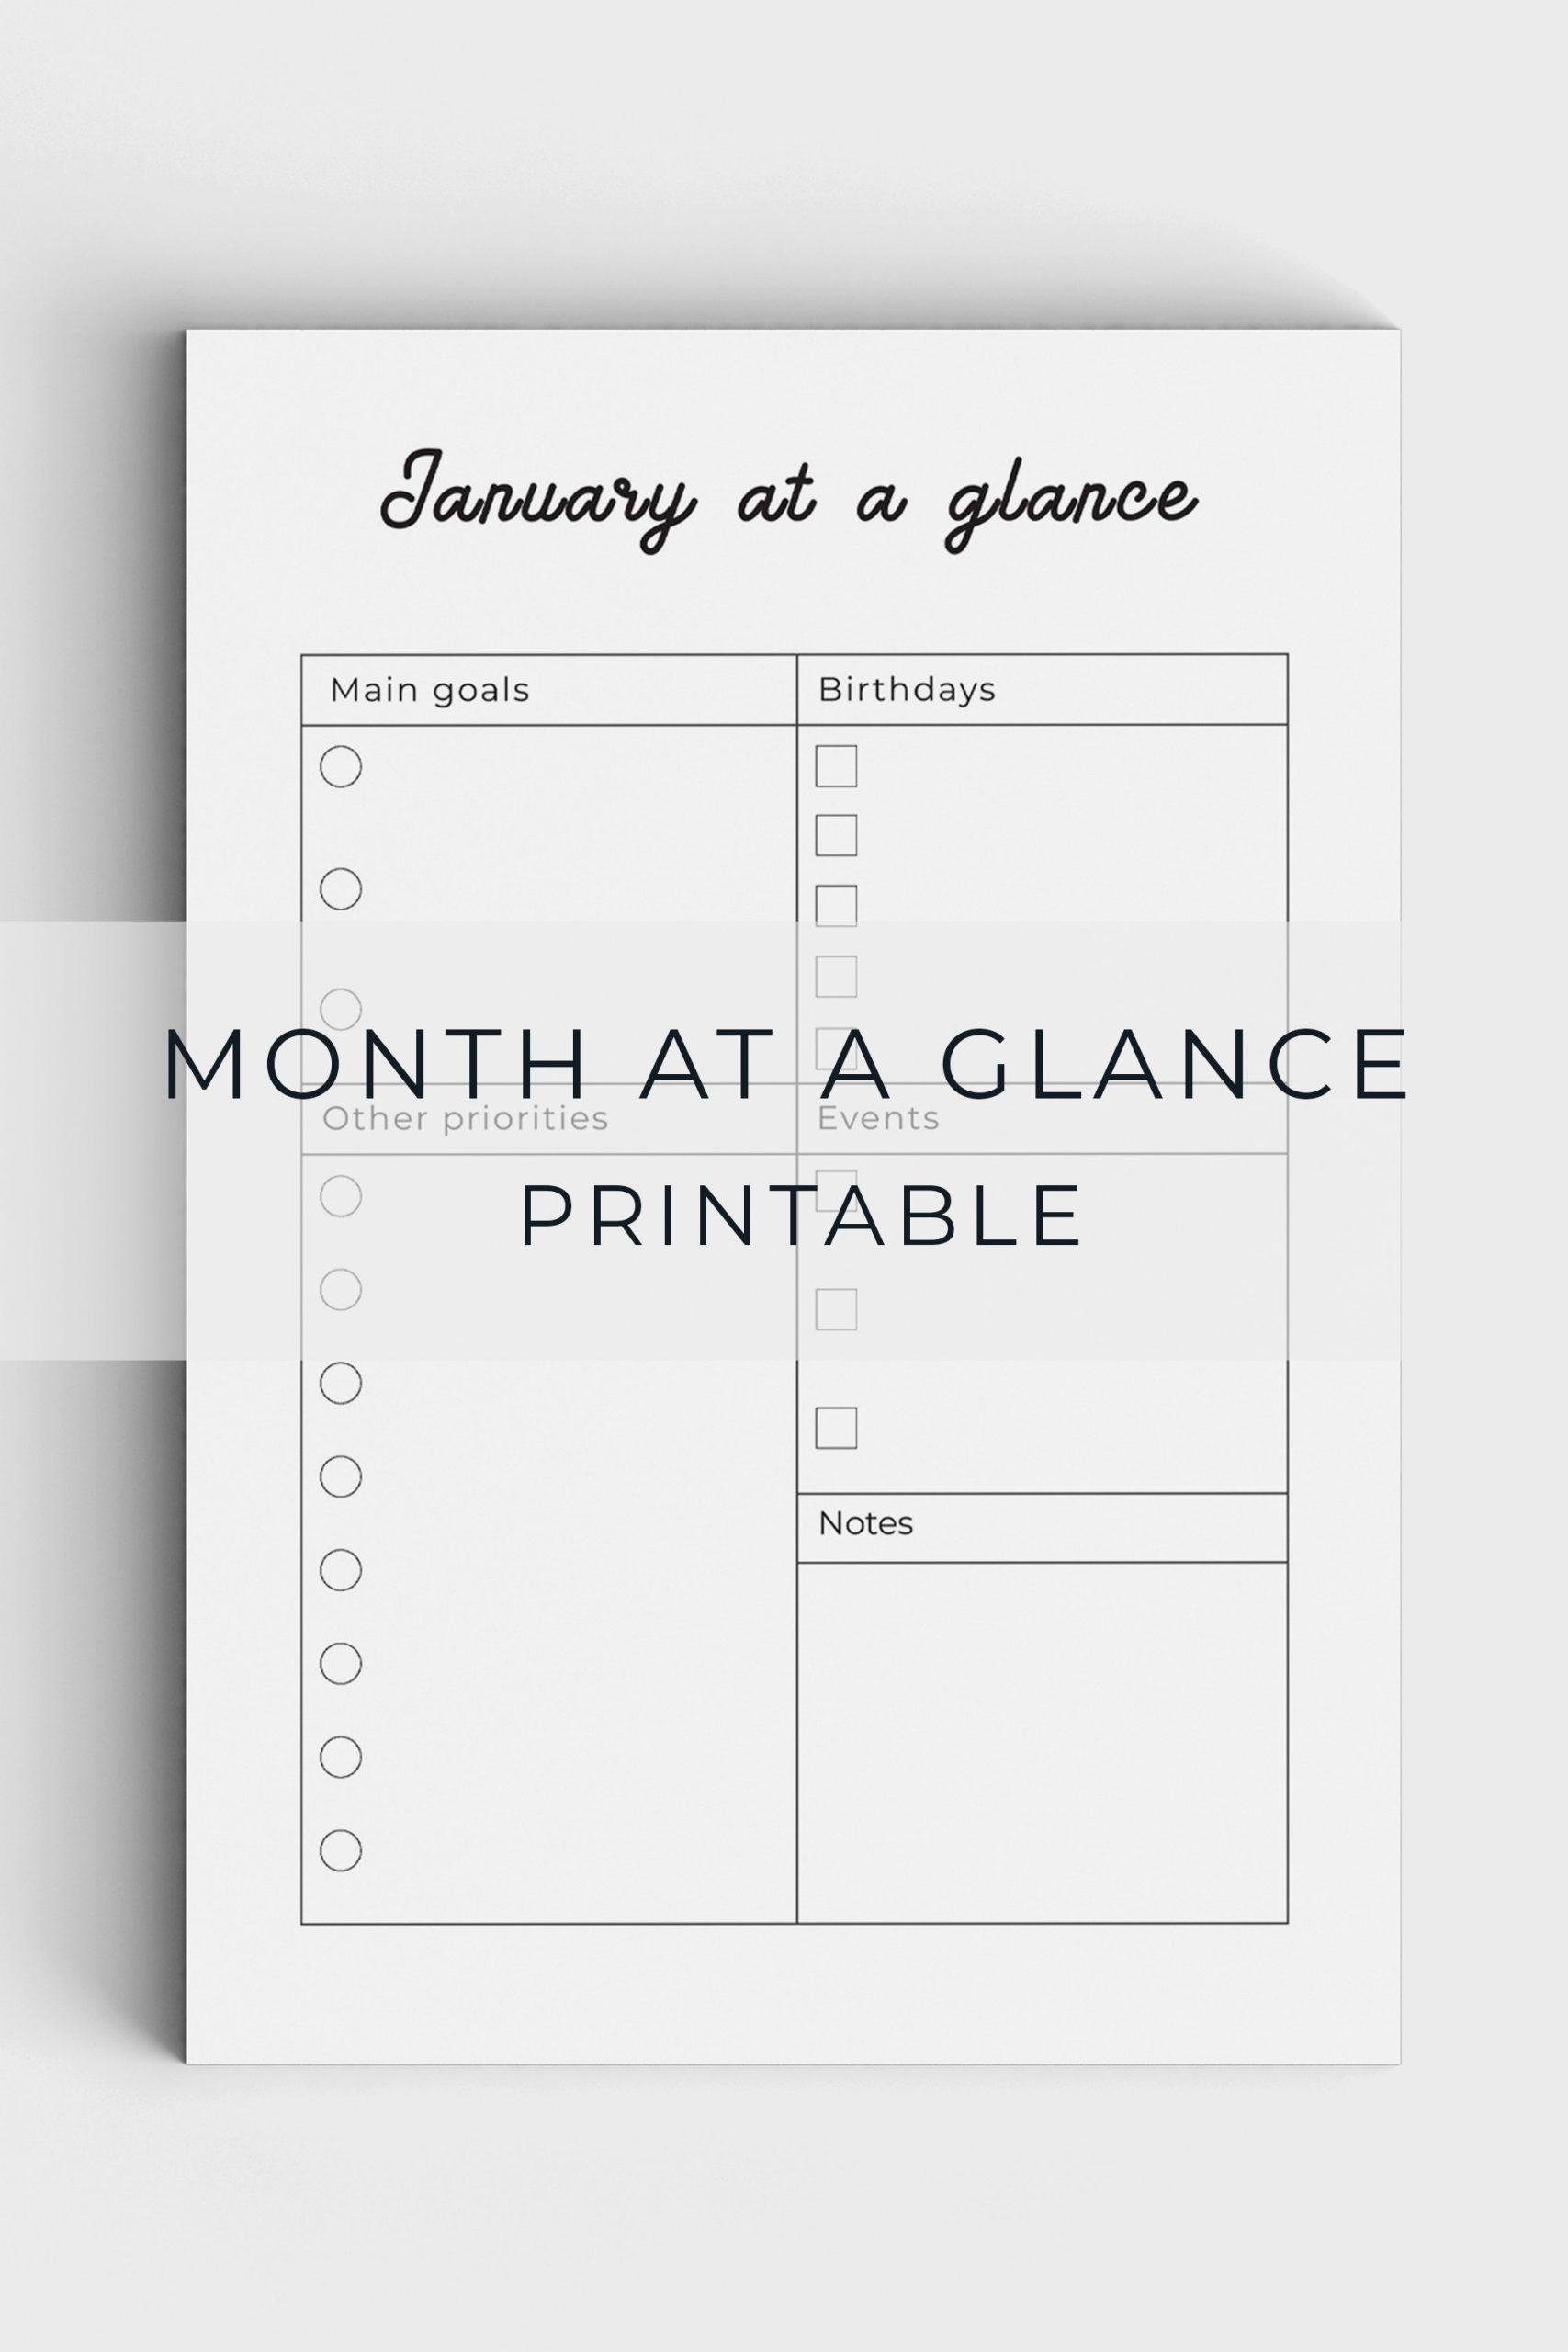 Month At A Glance Printable